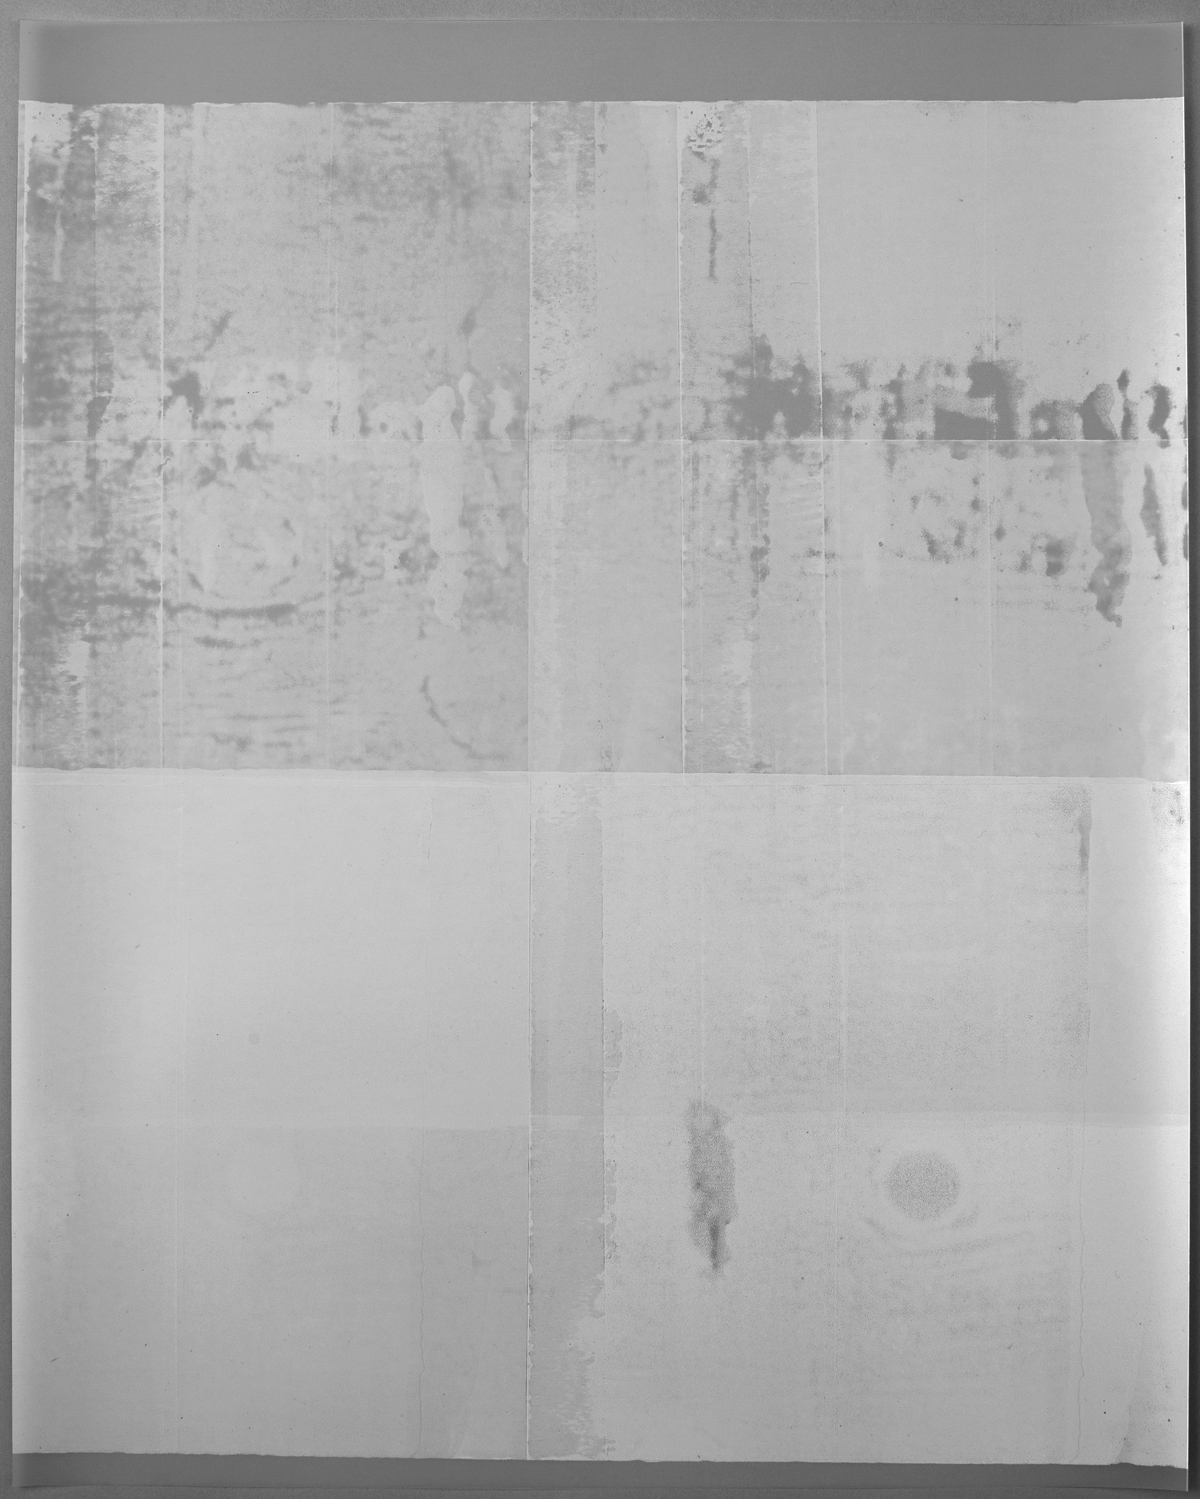   Untitled (white, from the series reflected/repeated - light becomes form, the horizon rests into view)  2015. &nbsp;Oil based ink painted on frosted mylar.&nbsp; Photographed here unframed against a grey background. 20 x 25 inches  